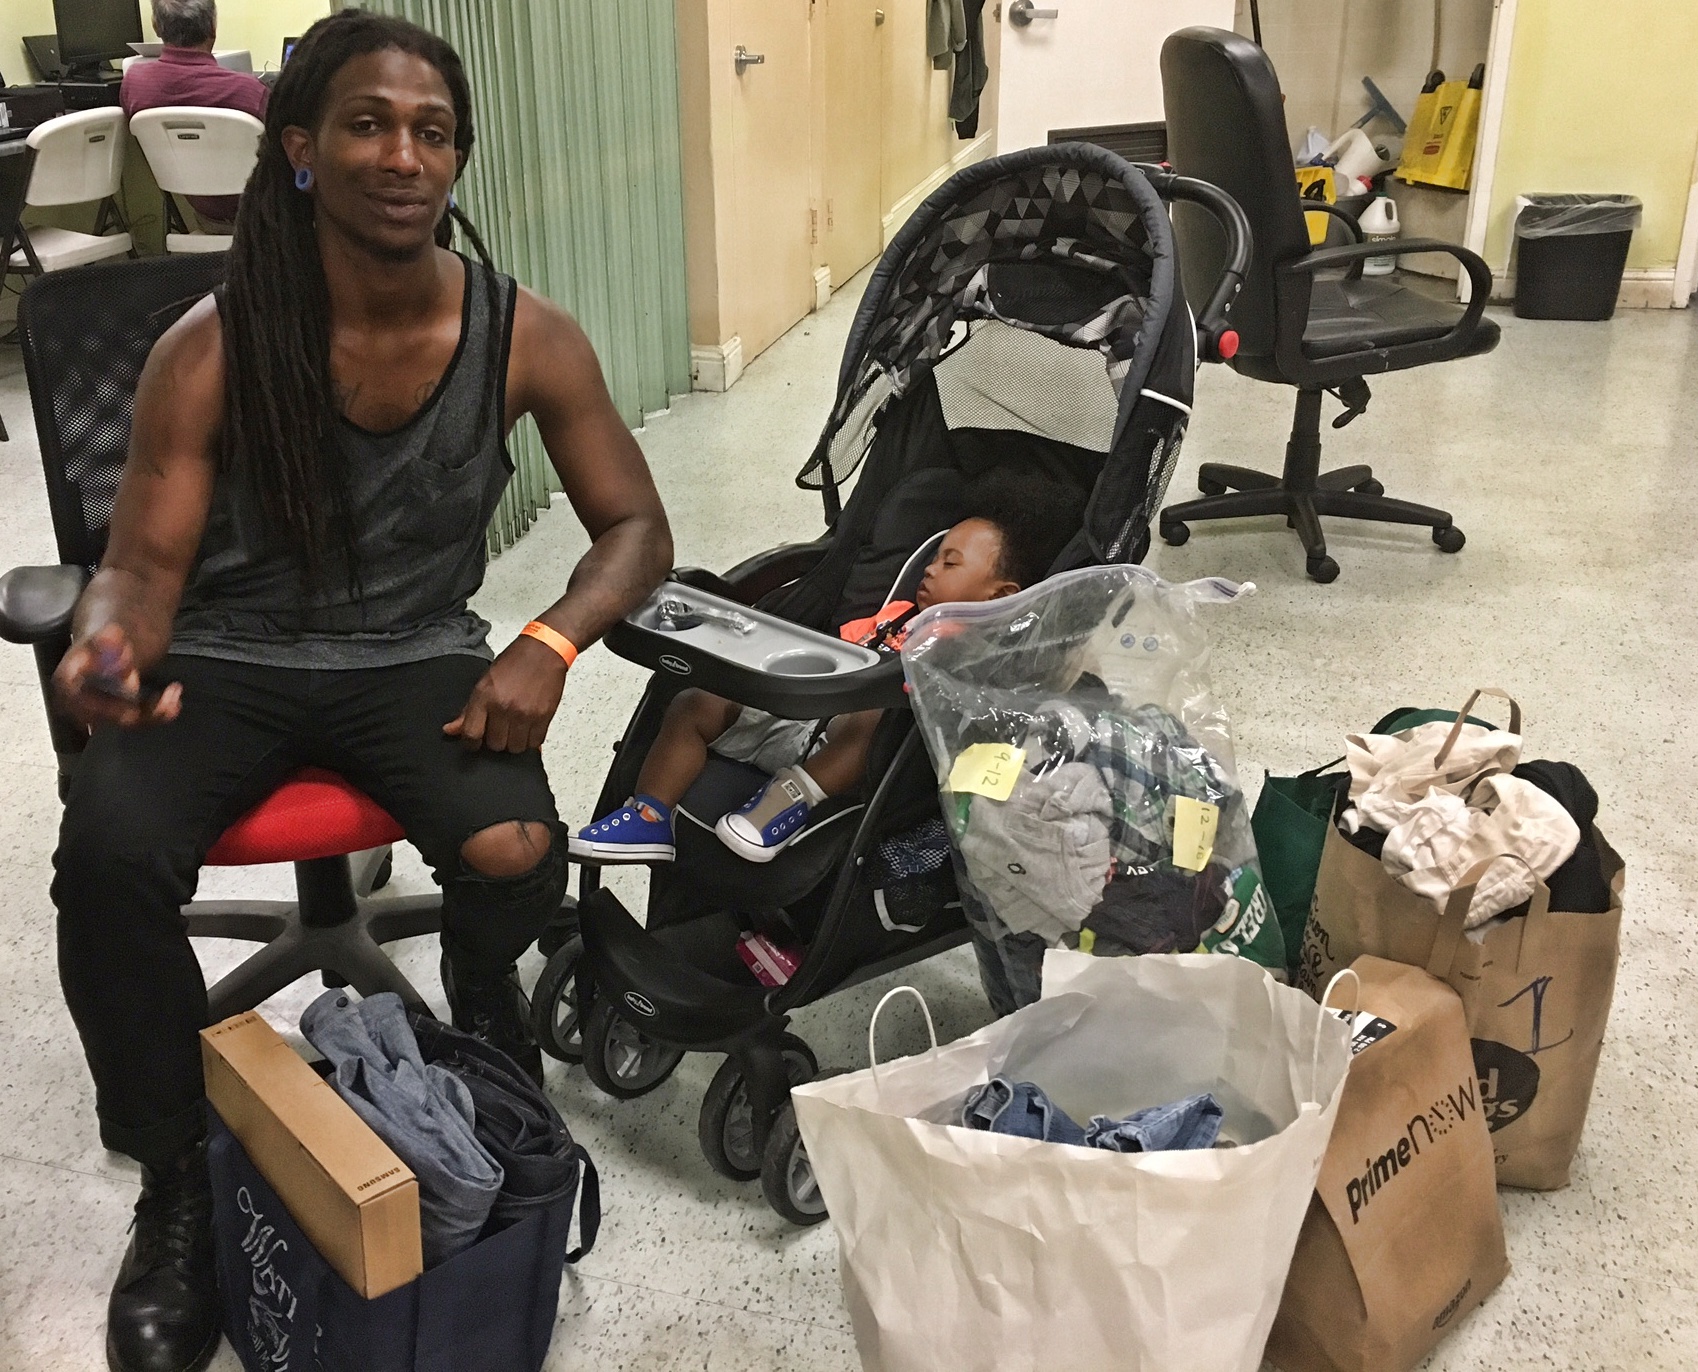 "I am so happy, people are way too kind" Williams said as he sat with his one year old son and donations they received from the community. Photo by Sana Saleem